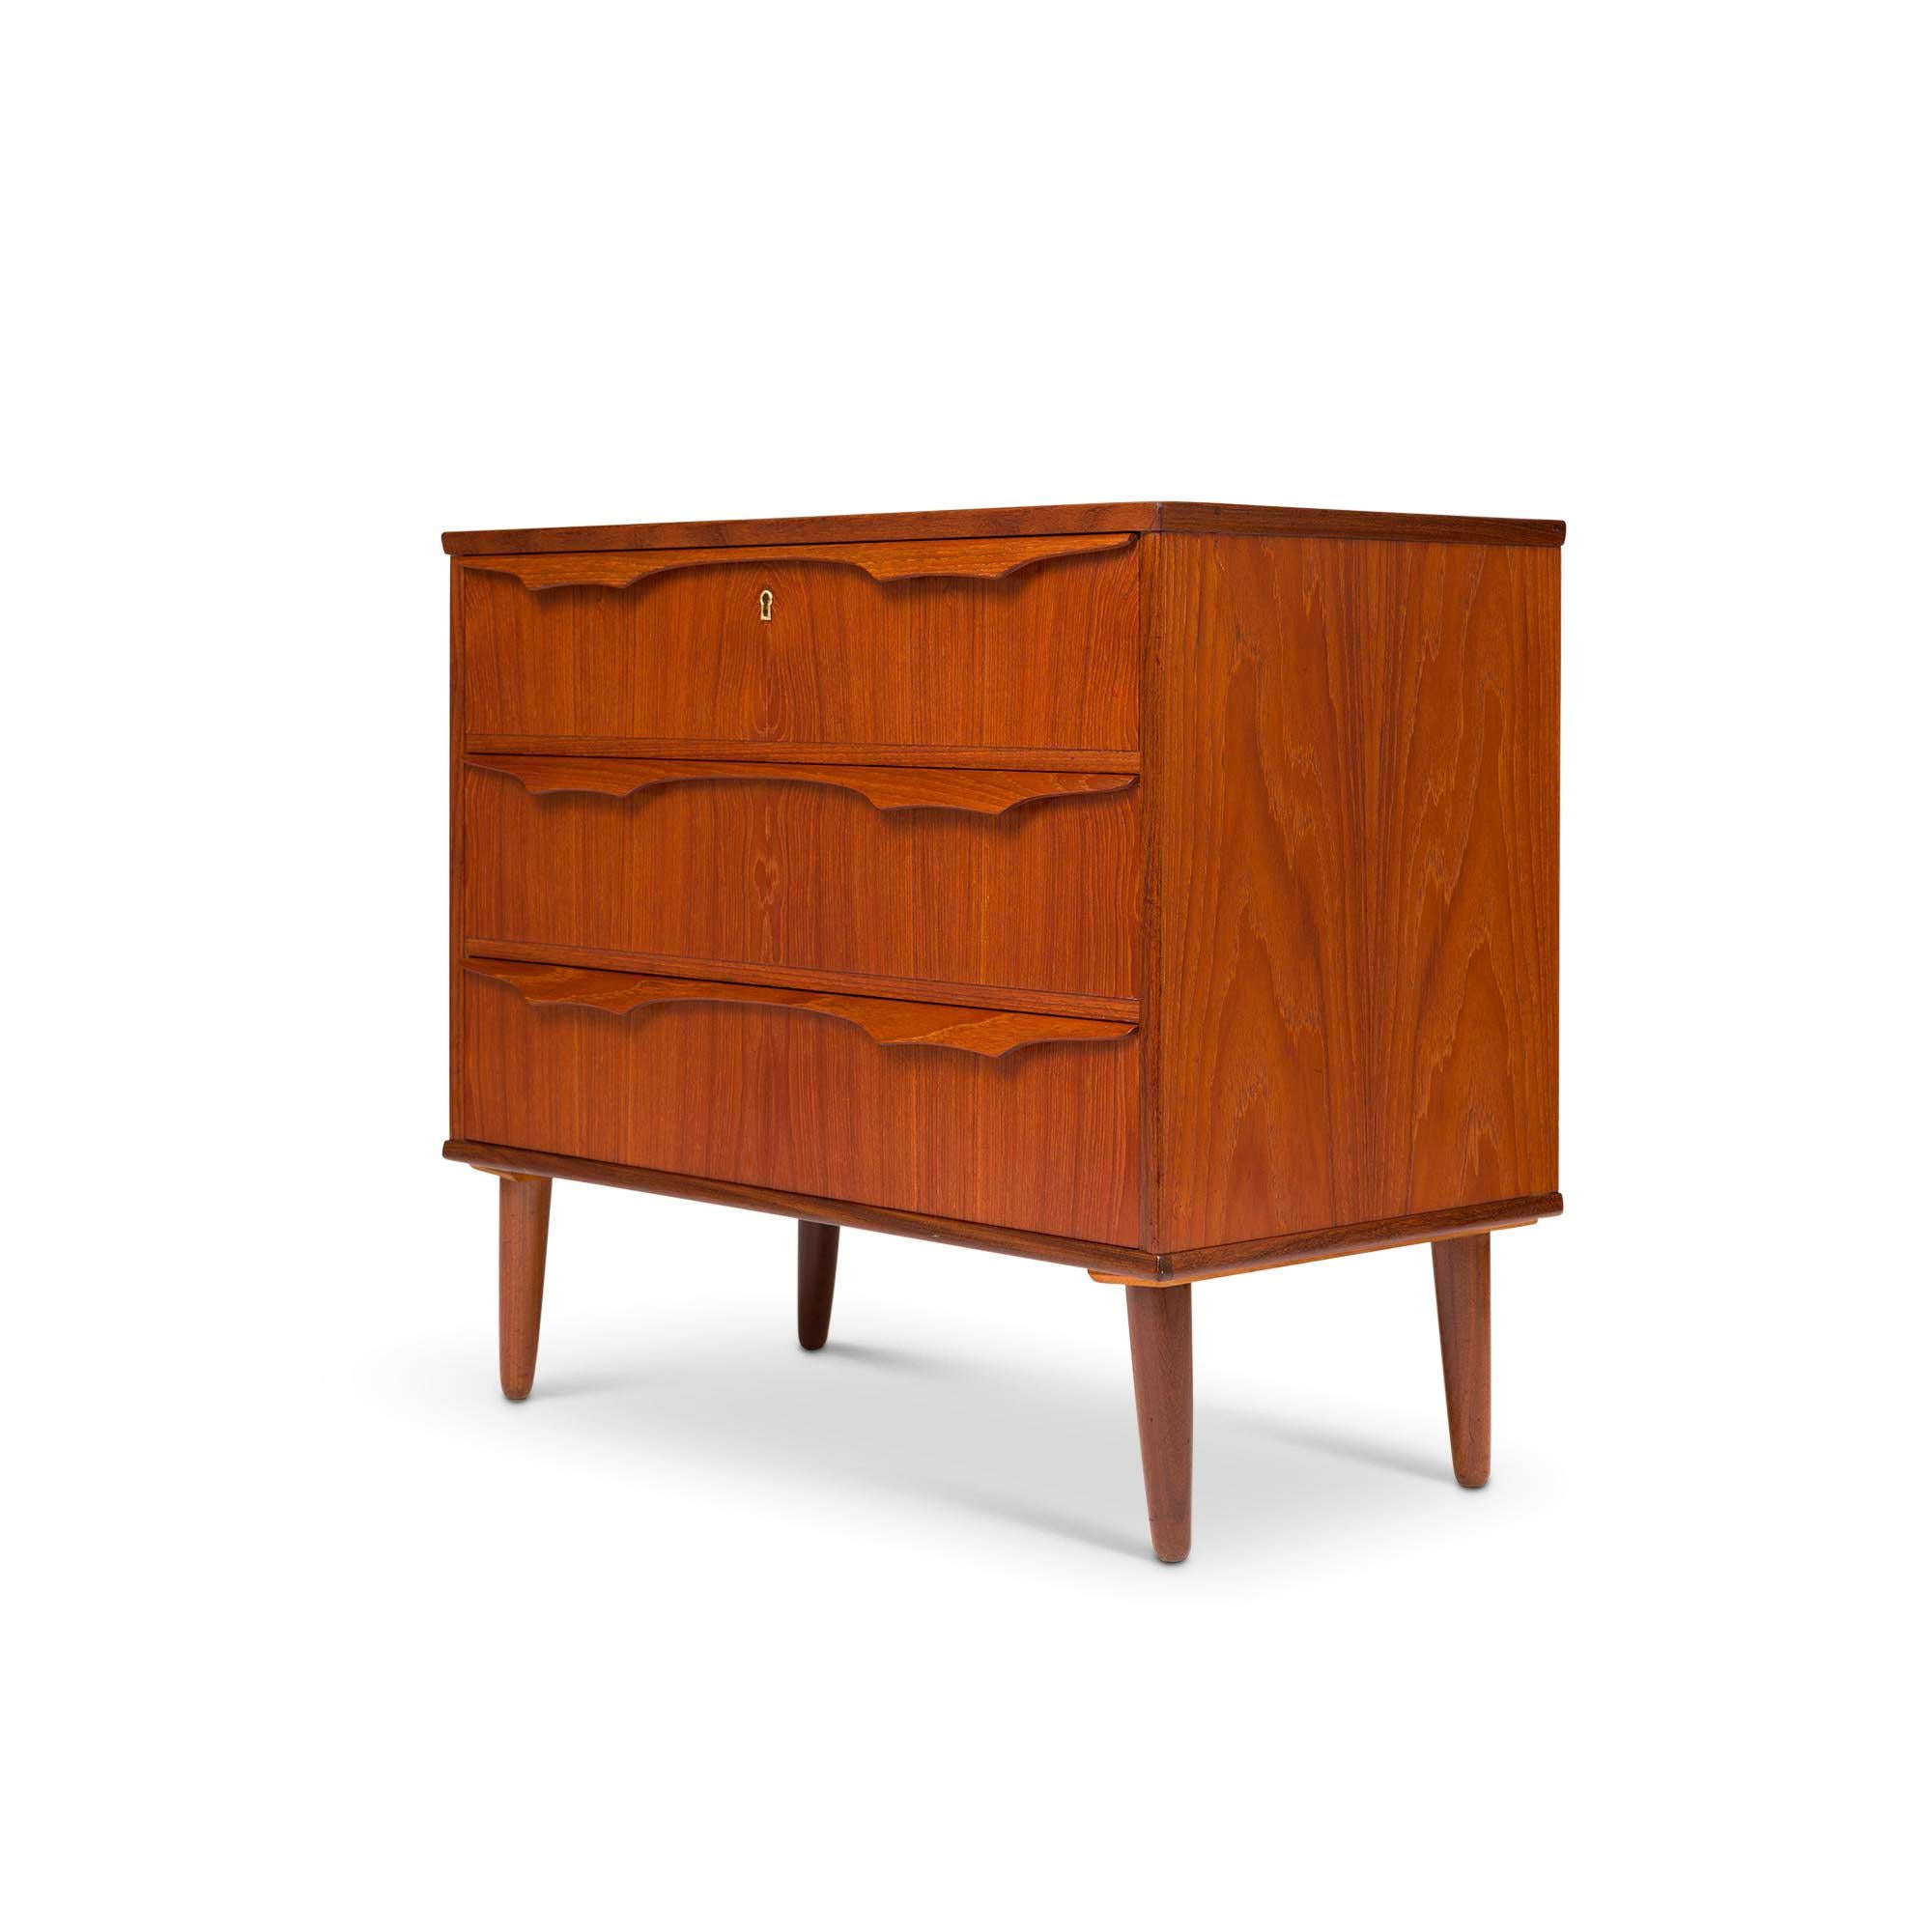 
Exuding timeless elegance, this vintage Danish mid-century modern lowboy dresser boasts exquisite teak wood grain that captivates the eye. Its allure lies in the three impeccably crafted drawers adorned with intricately carved drawer pulls, all in